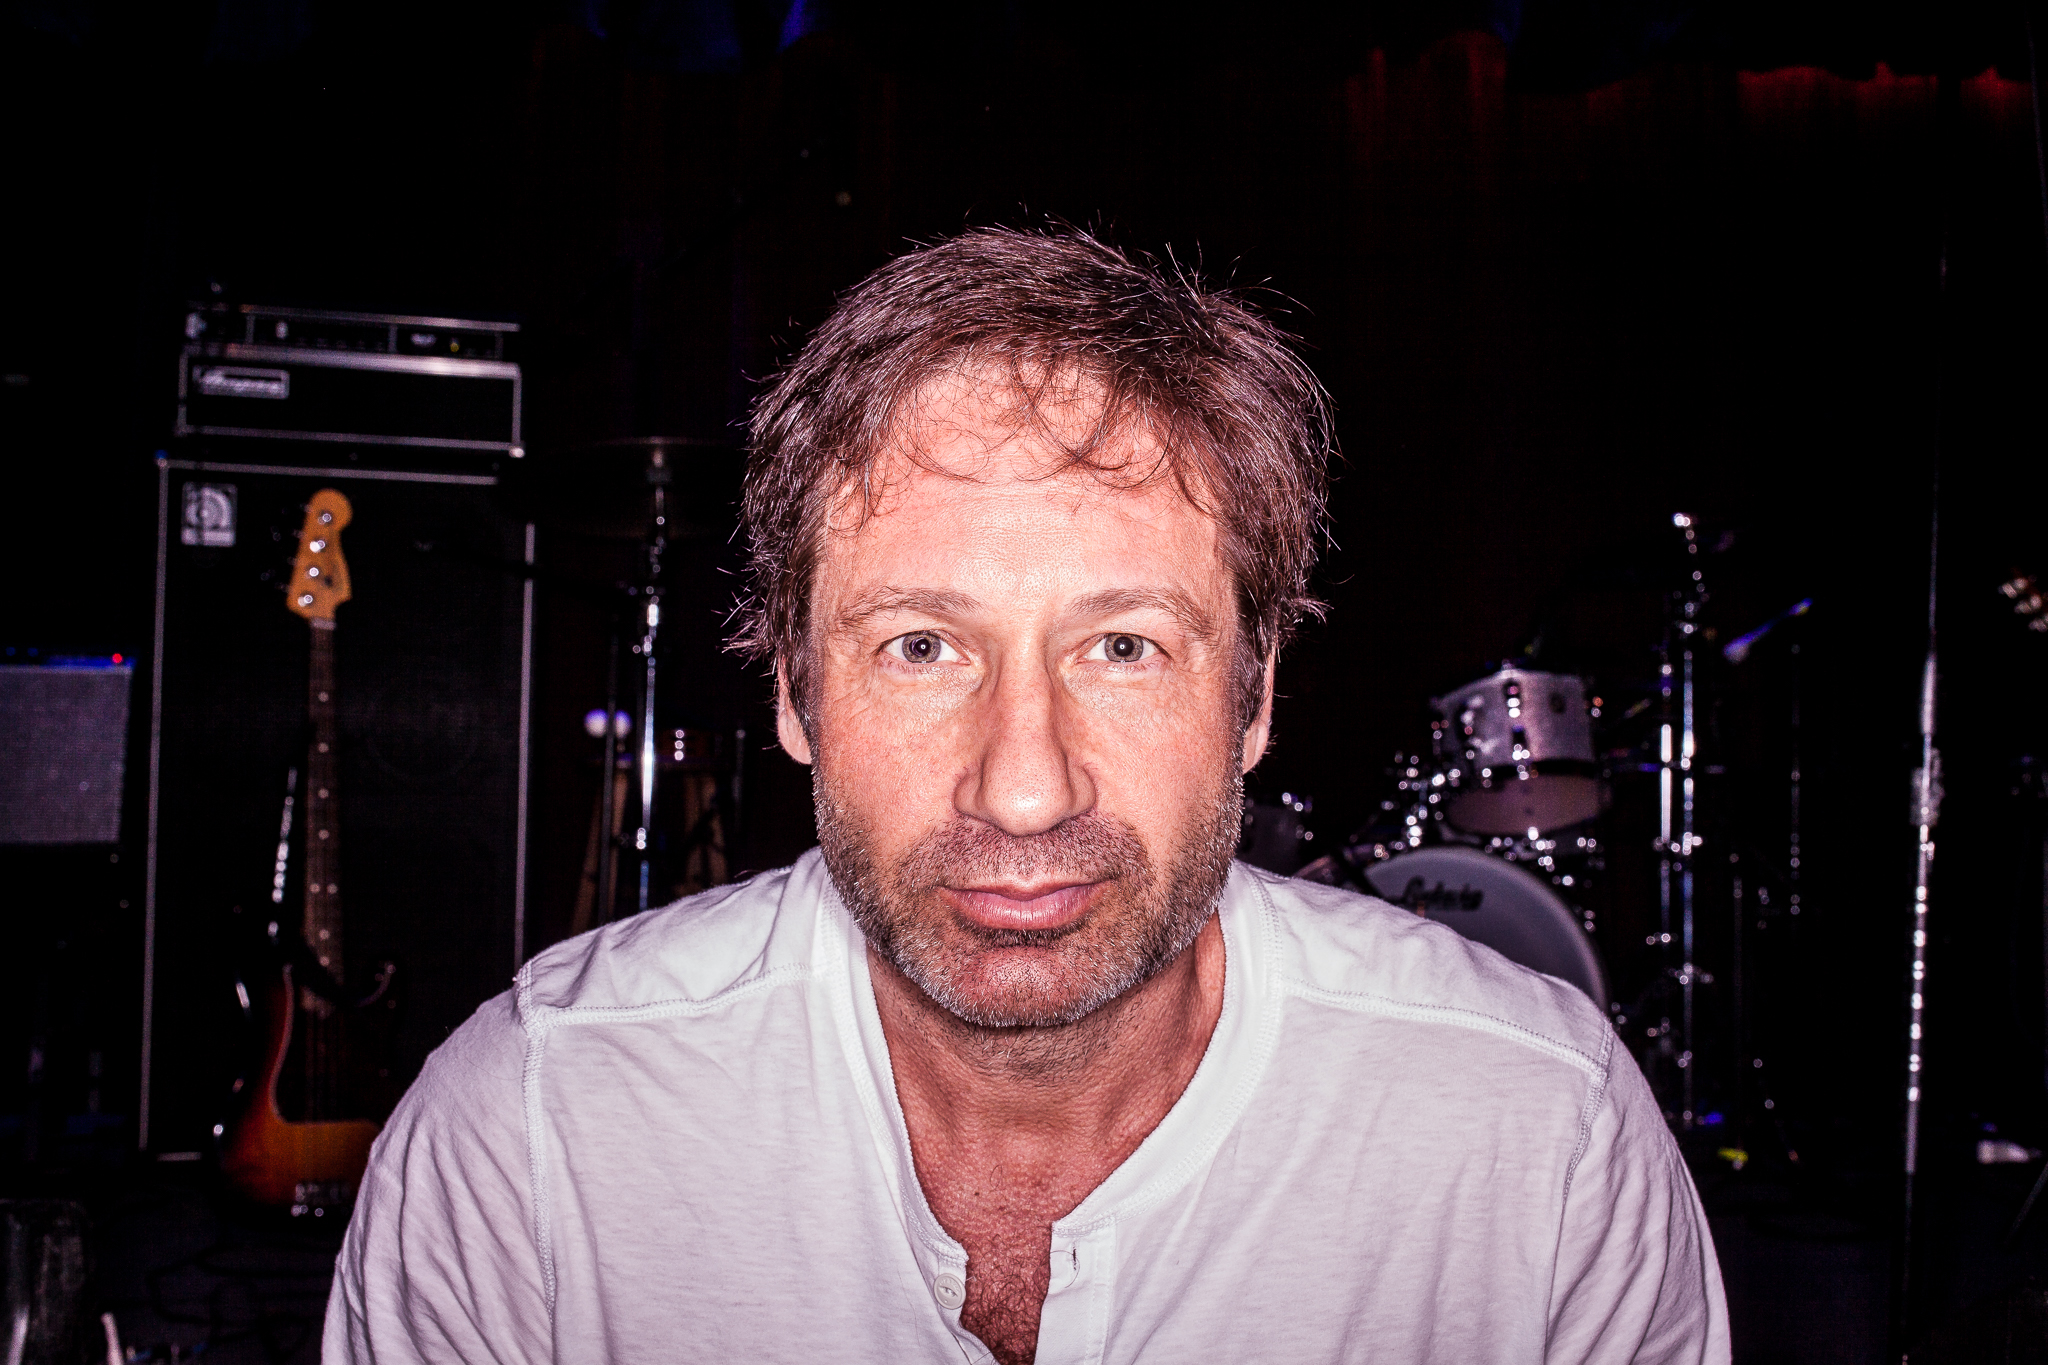 RAIN IN HELL – A CONVERSATION WITH DAVID DUCHOVNY